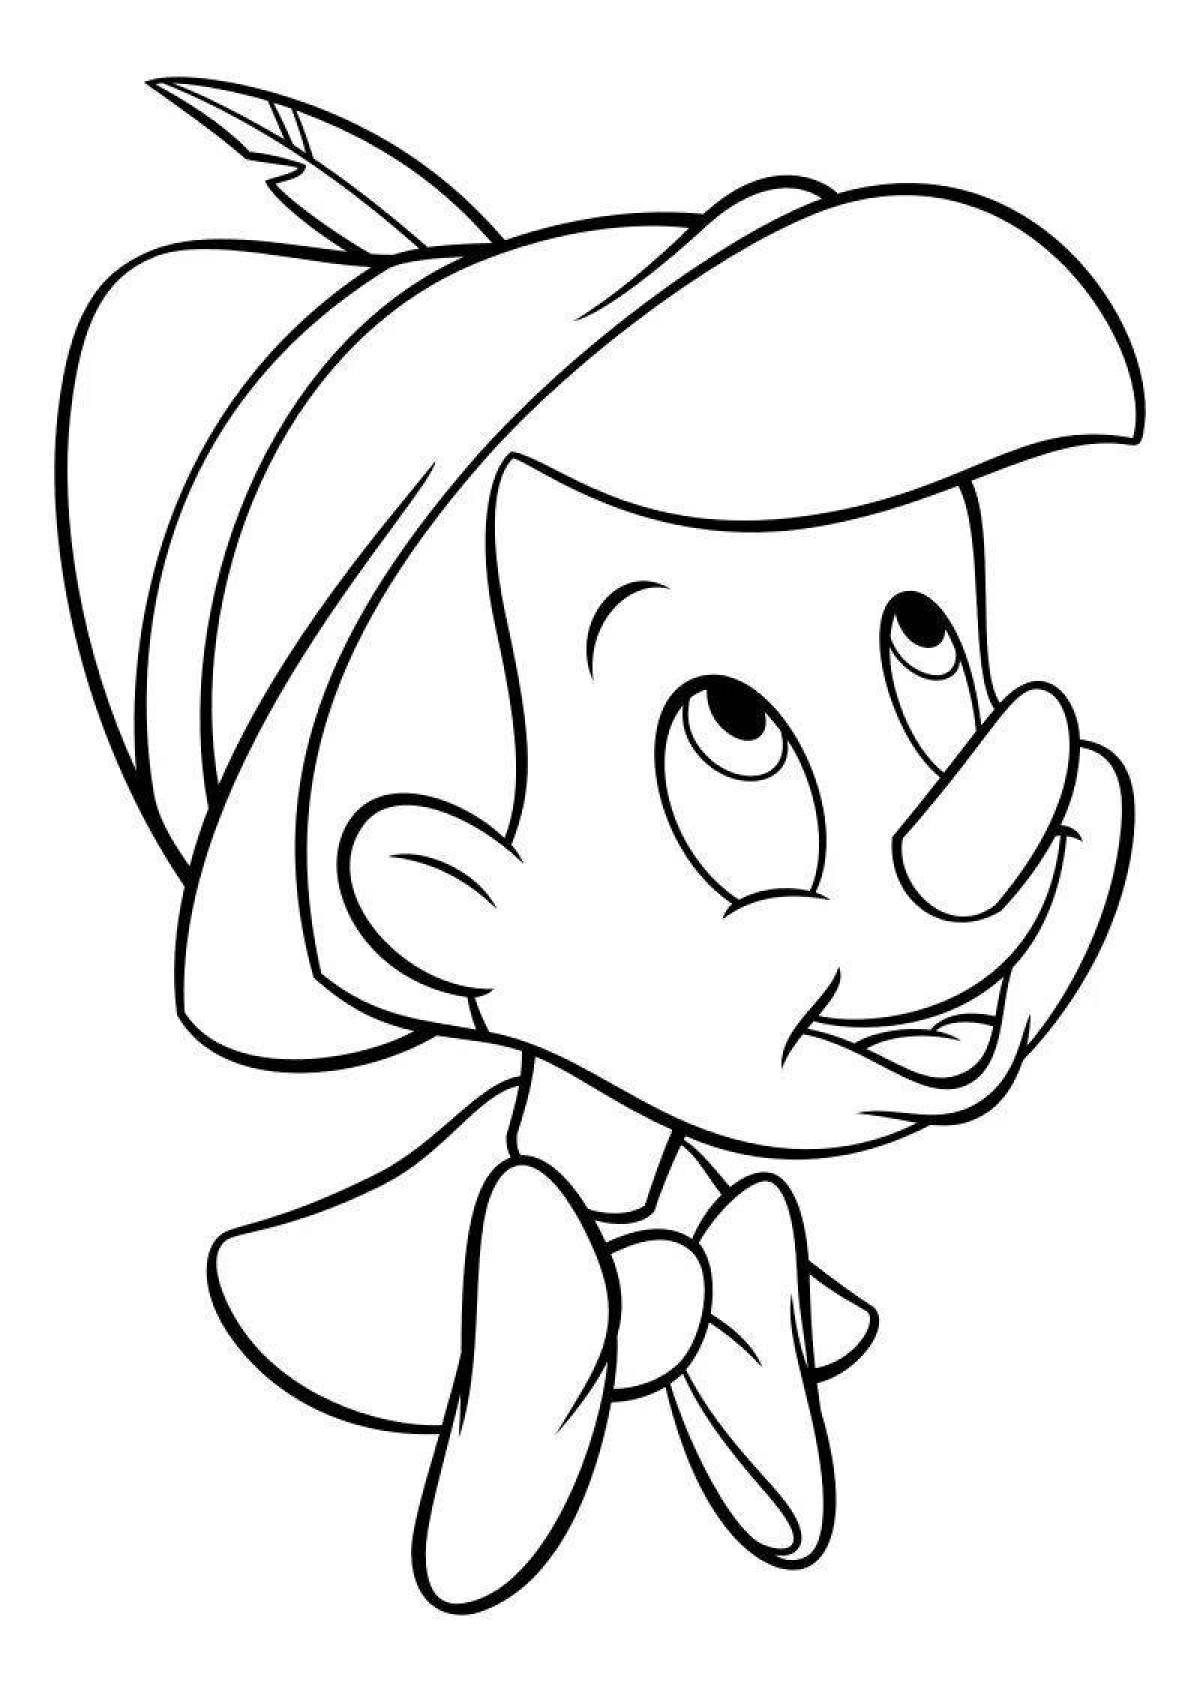 Adorable pinocchio coloring book for kids